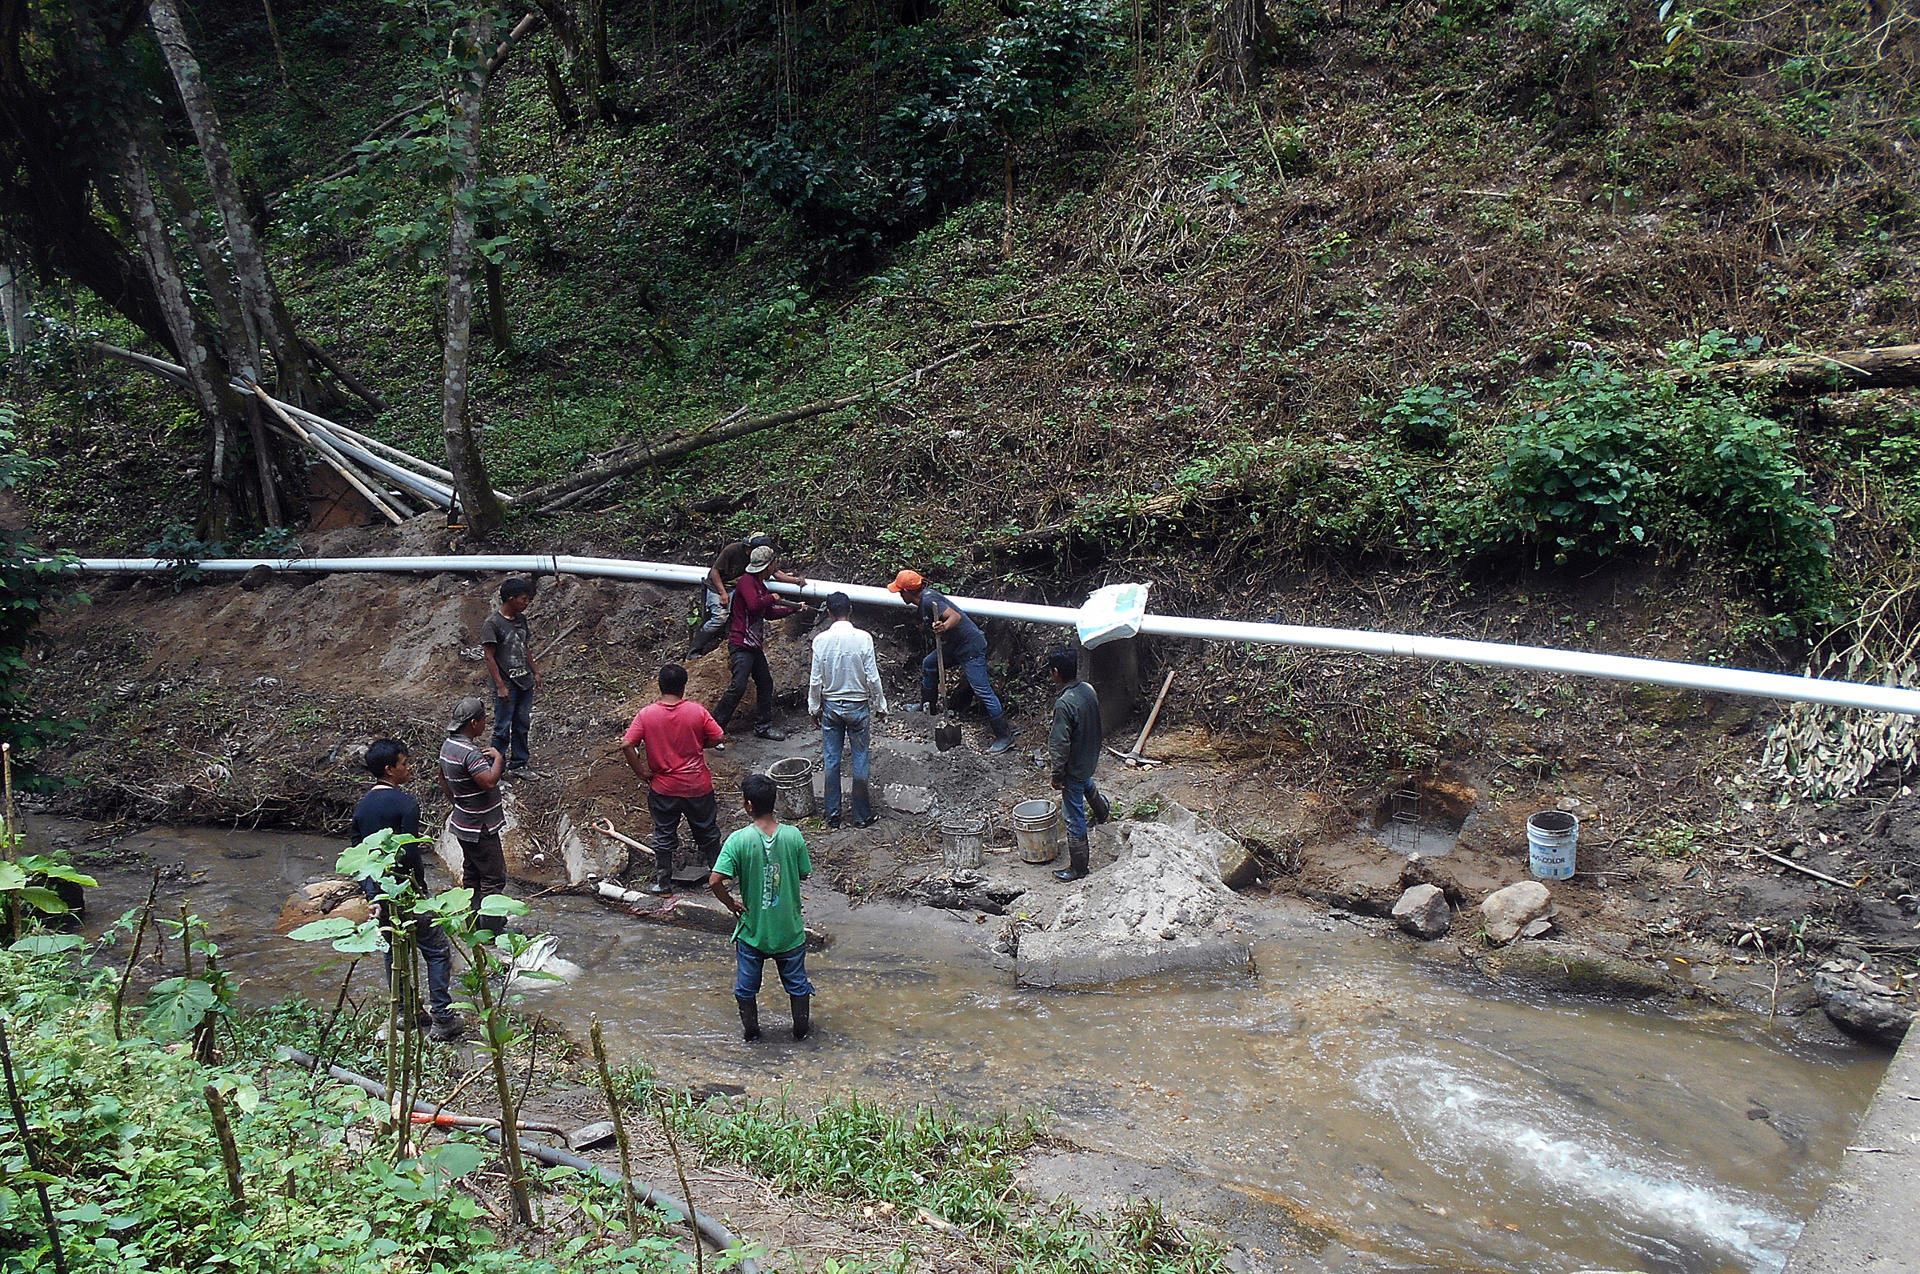 Photograph provided by UNDP showing people installing a hydraulic water network in the Argelia Altaluz municipality, Chiapas state (Mexico). EFE/UNDP/ EDITORIAL USE ONLY / ONLY AVAILABLE TO ILLUSTRATE THE ACCOMPANYING NEWS (MANDATORY CREDIT)